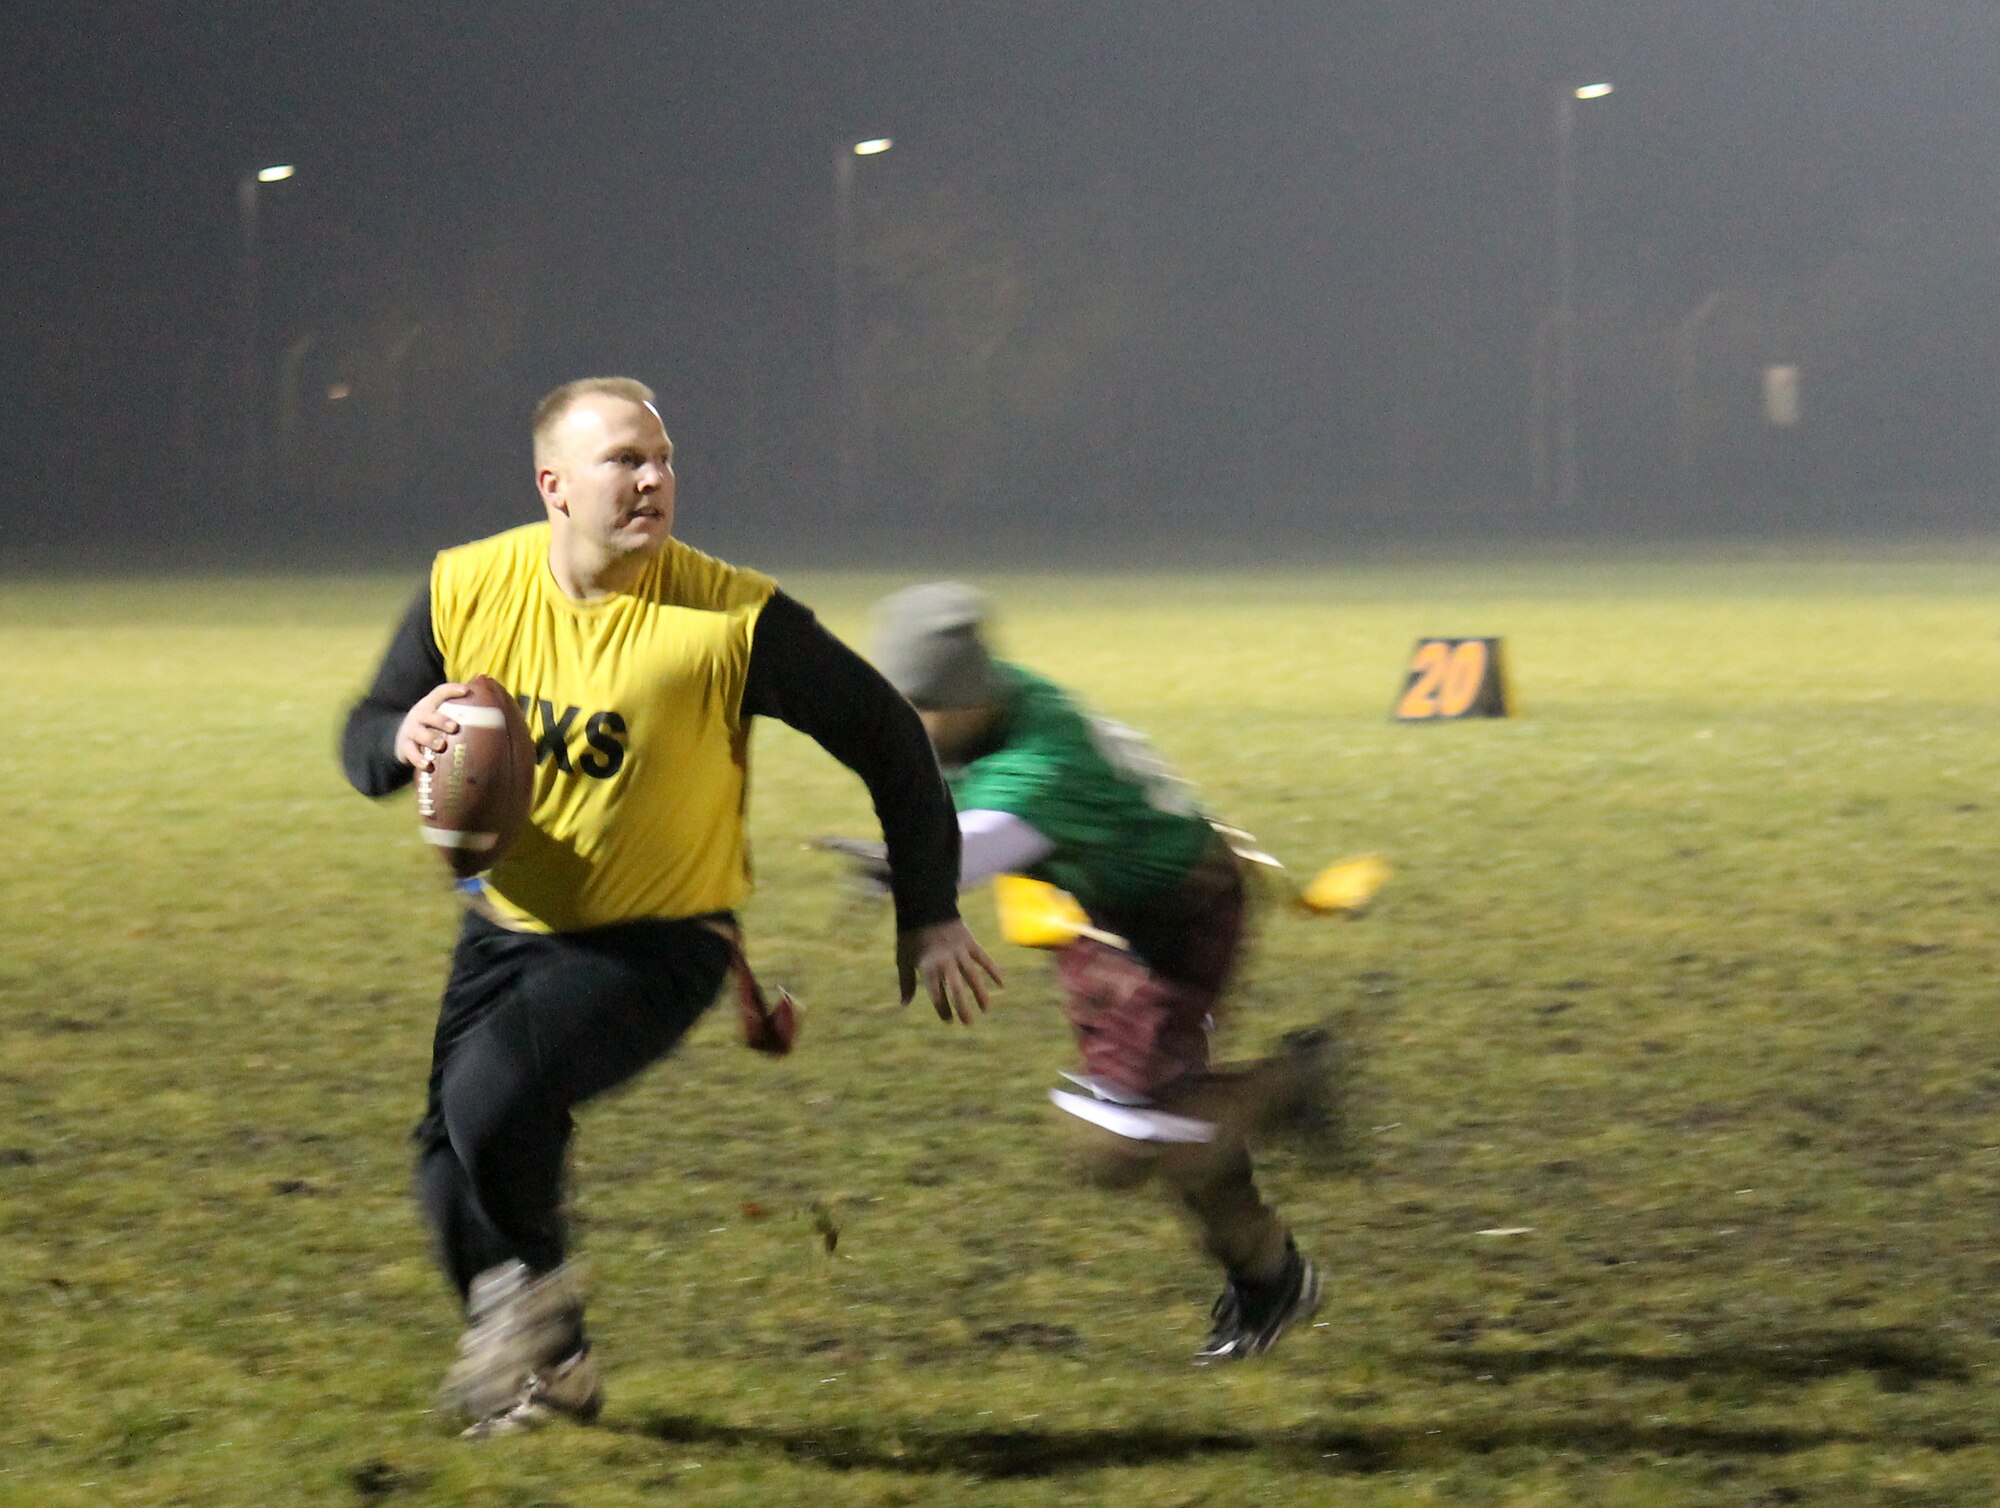 Staff Sgt. Brian Szarek, 100th Maintenance Group team quarterback, avoids a tackle during the RAF Mildenhall flag football championship game Dec. 12, 2012, at RAF Mildenhall, England. Maintenance defeated the 100th Communications Squadron/Force Support Squadron team by a final score of 14-12. (U.S. Air Force photo by Capt. Jason Smith/Released)